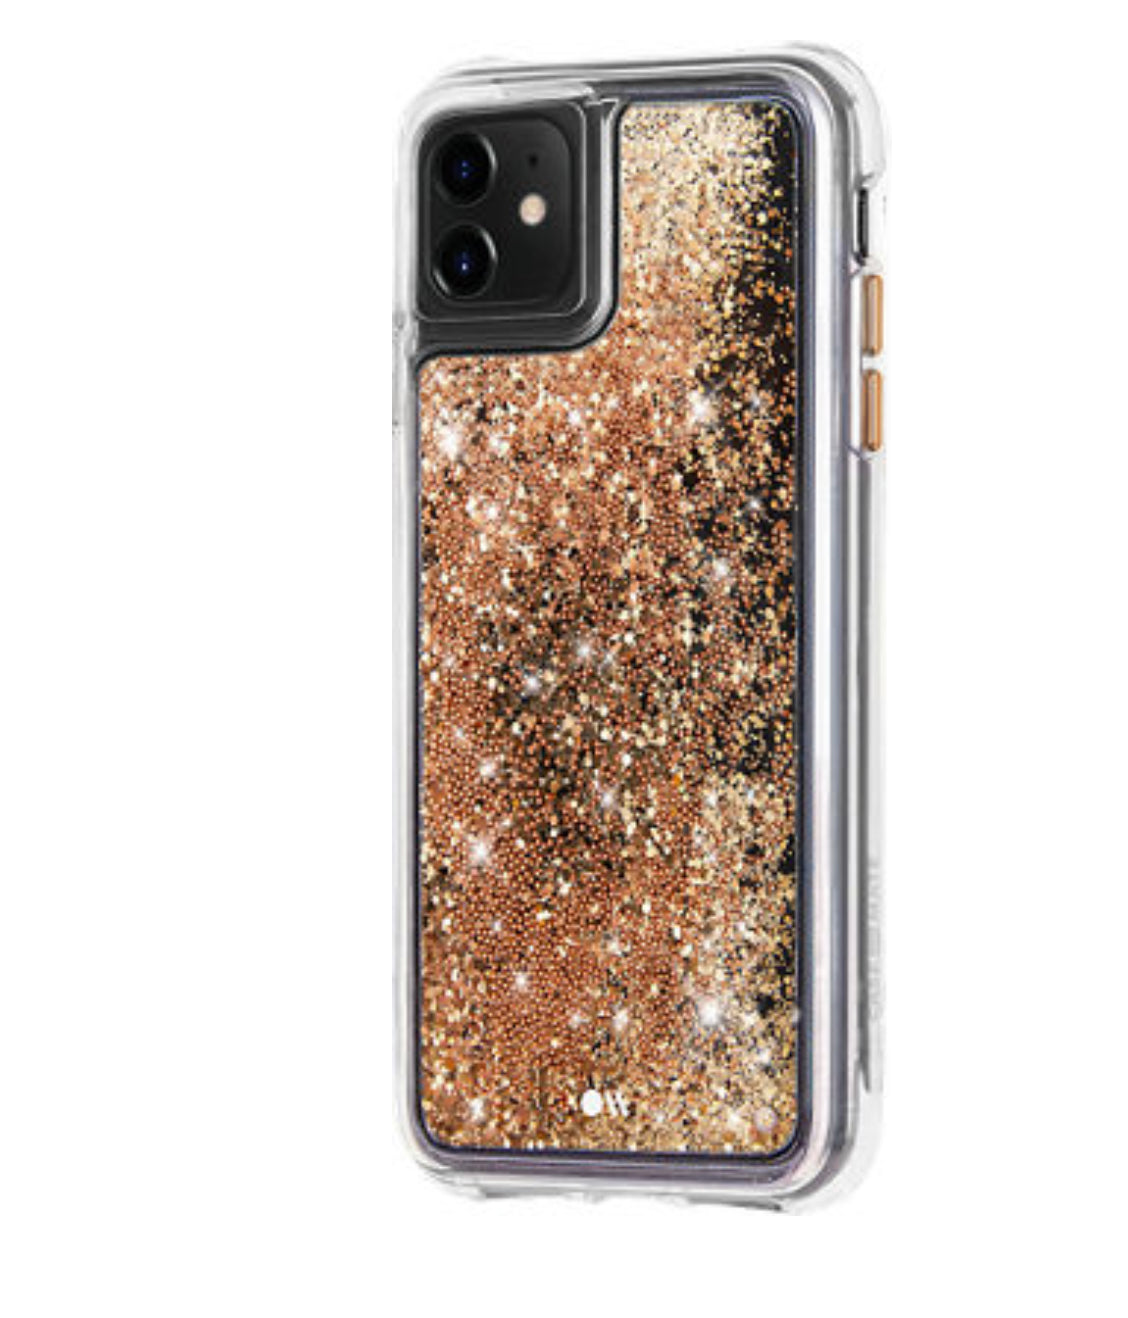 Case-Mate Waterfall Case for iPhone 11